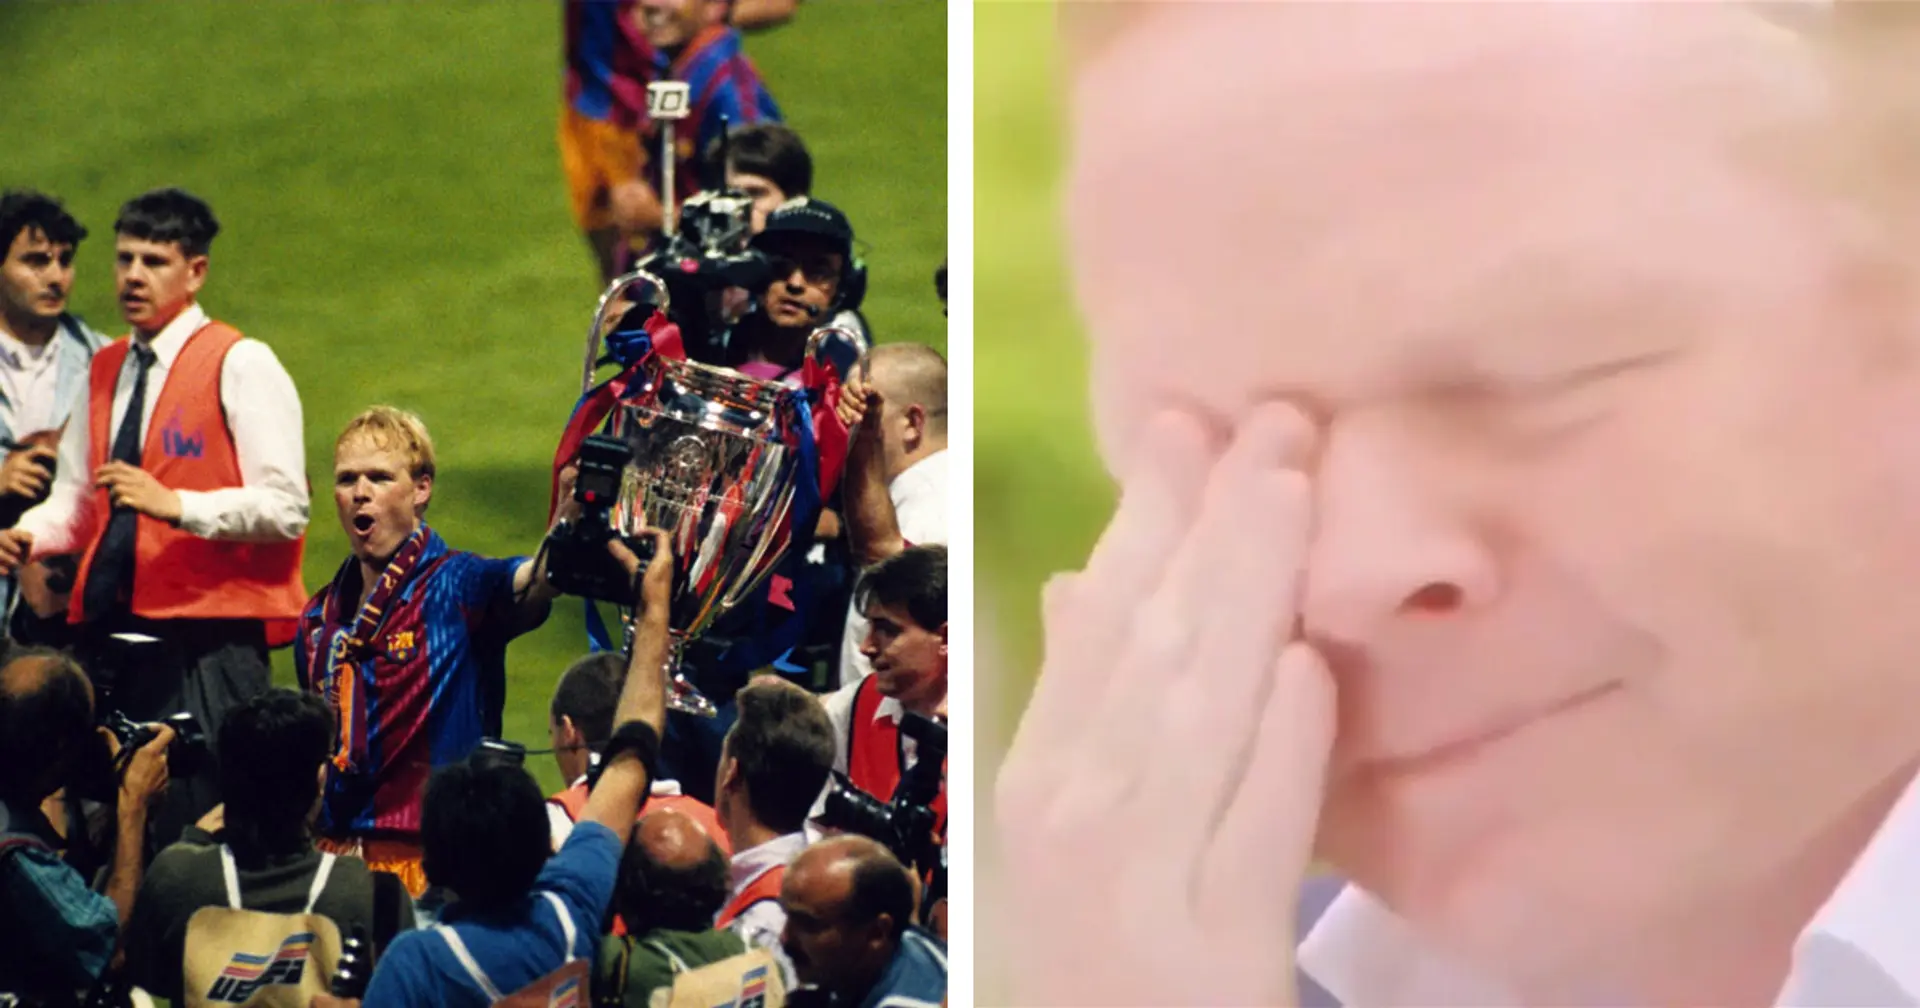 Koeman in tears after recalling Champions League win with Barca in 1992